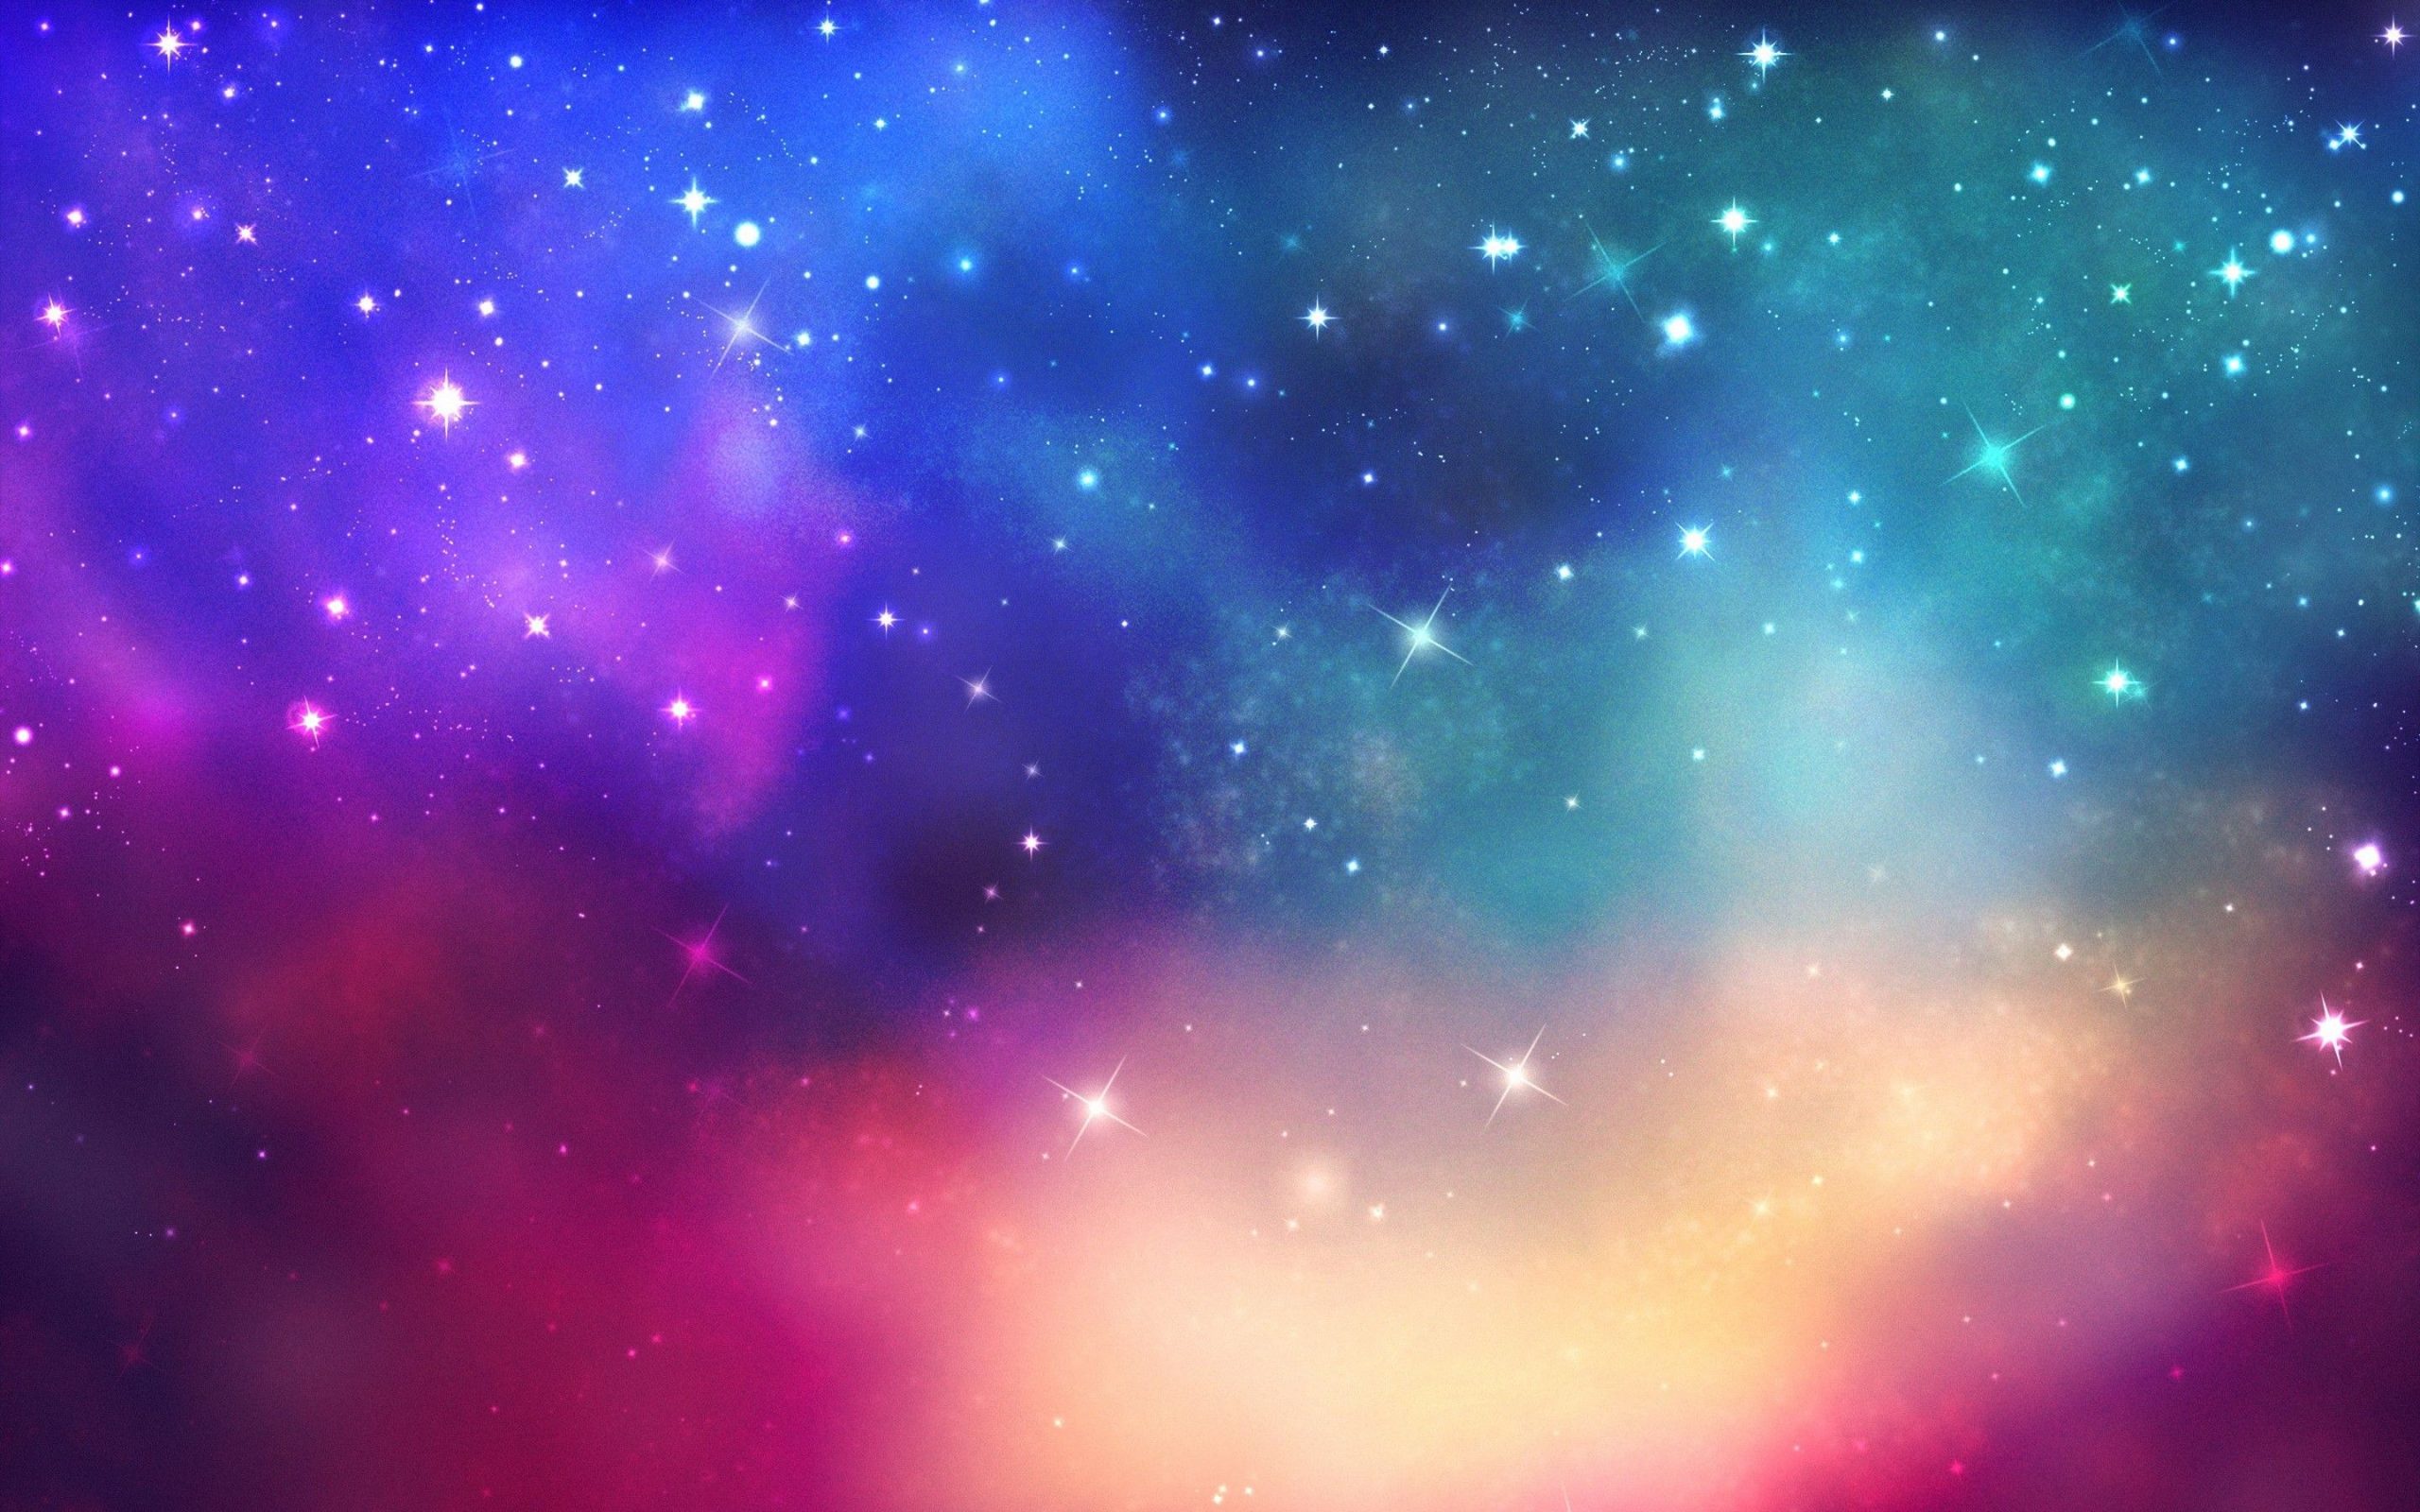 Galaxy Background Images HD Pictures and Wallpaper For Free Download   Pngtree